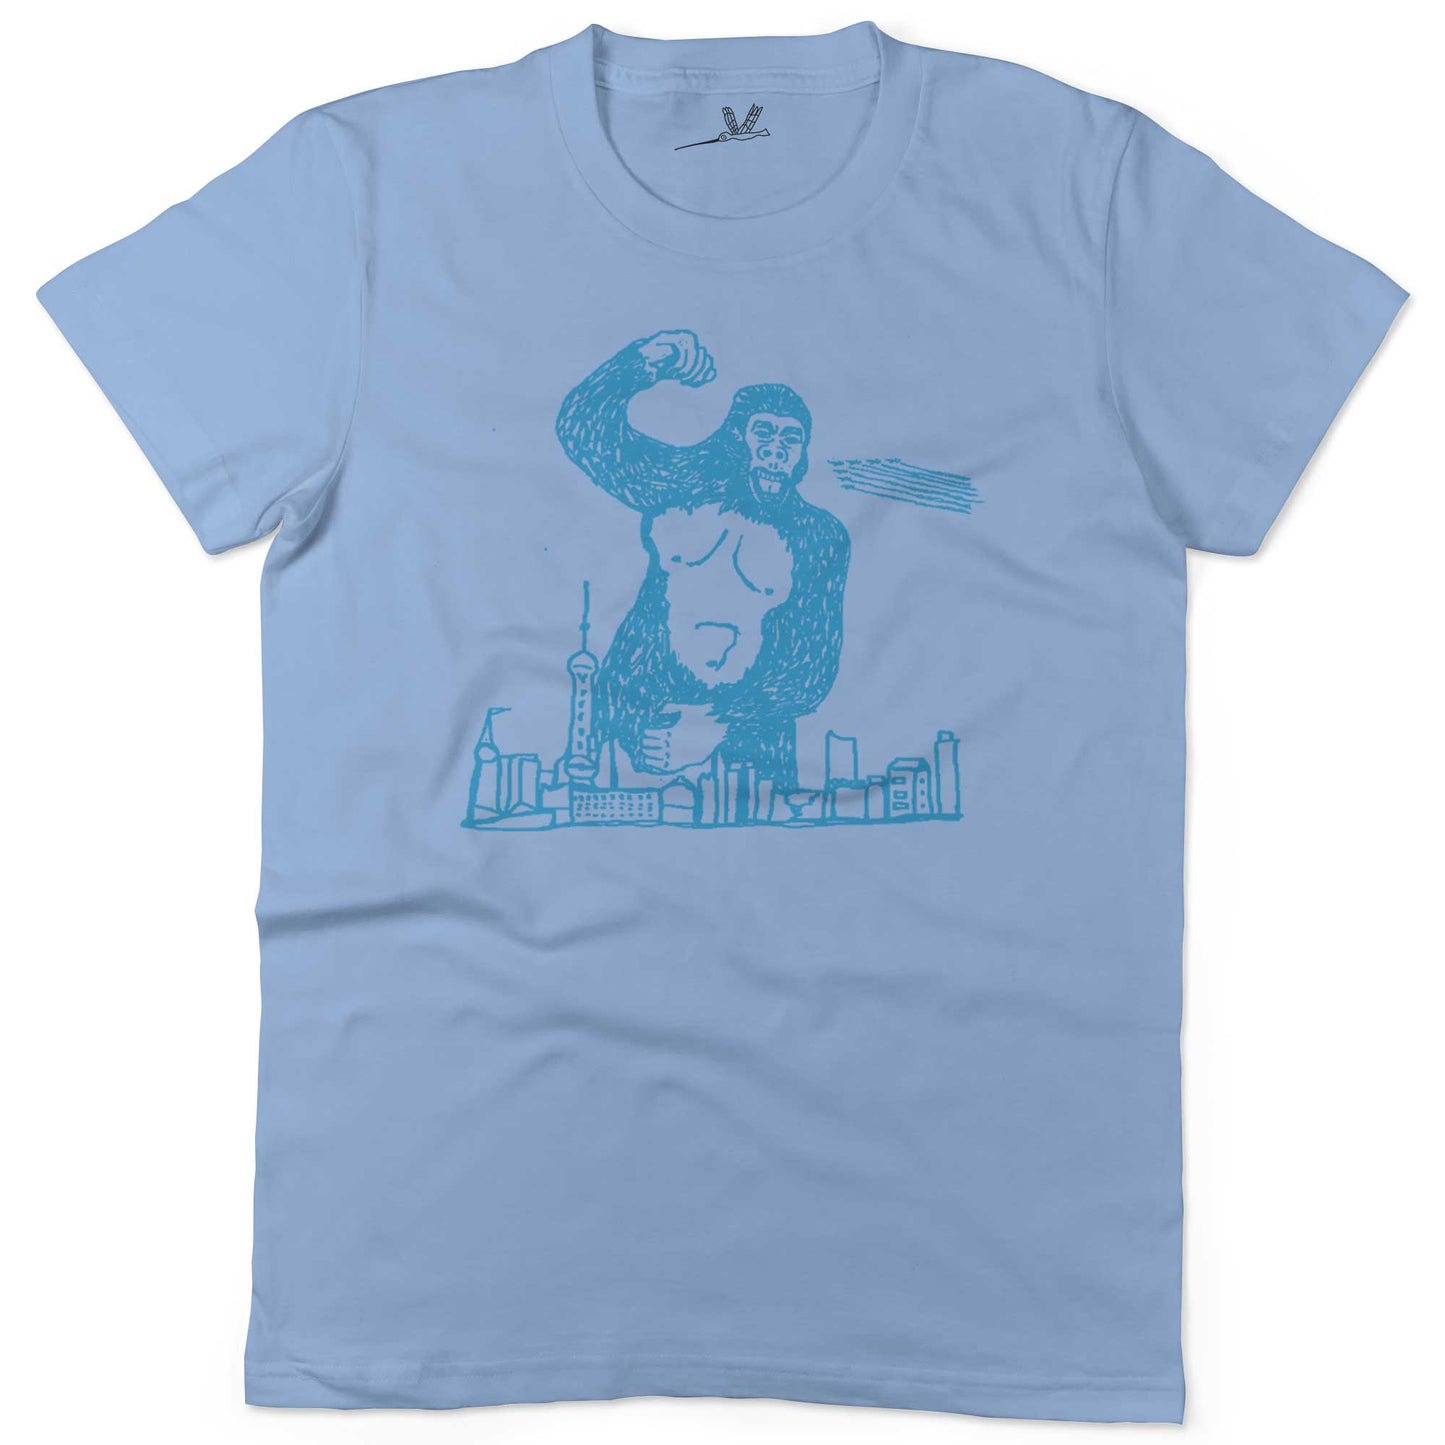 Giant Gorilla Drawing Unisex Or Women's Cotton T-shirt-Baby Blue-Woman